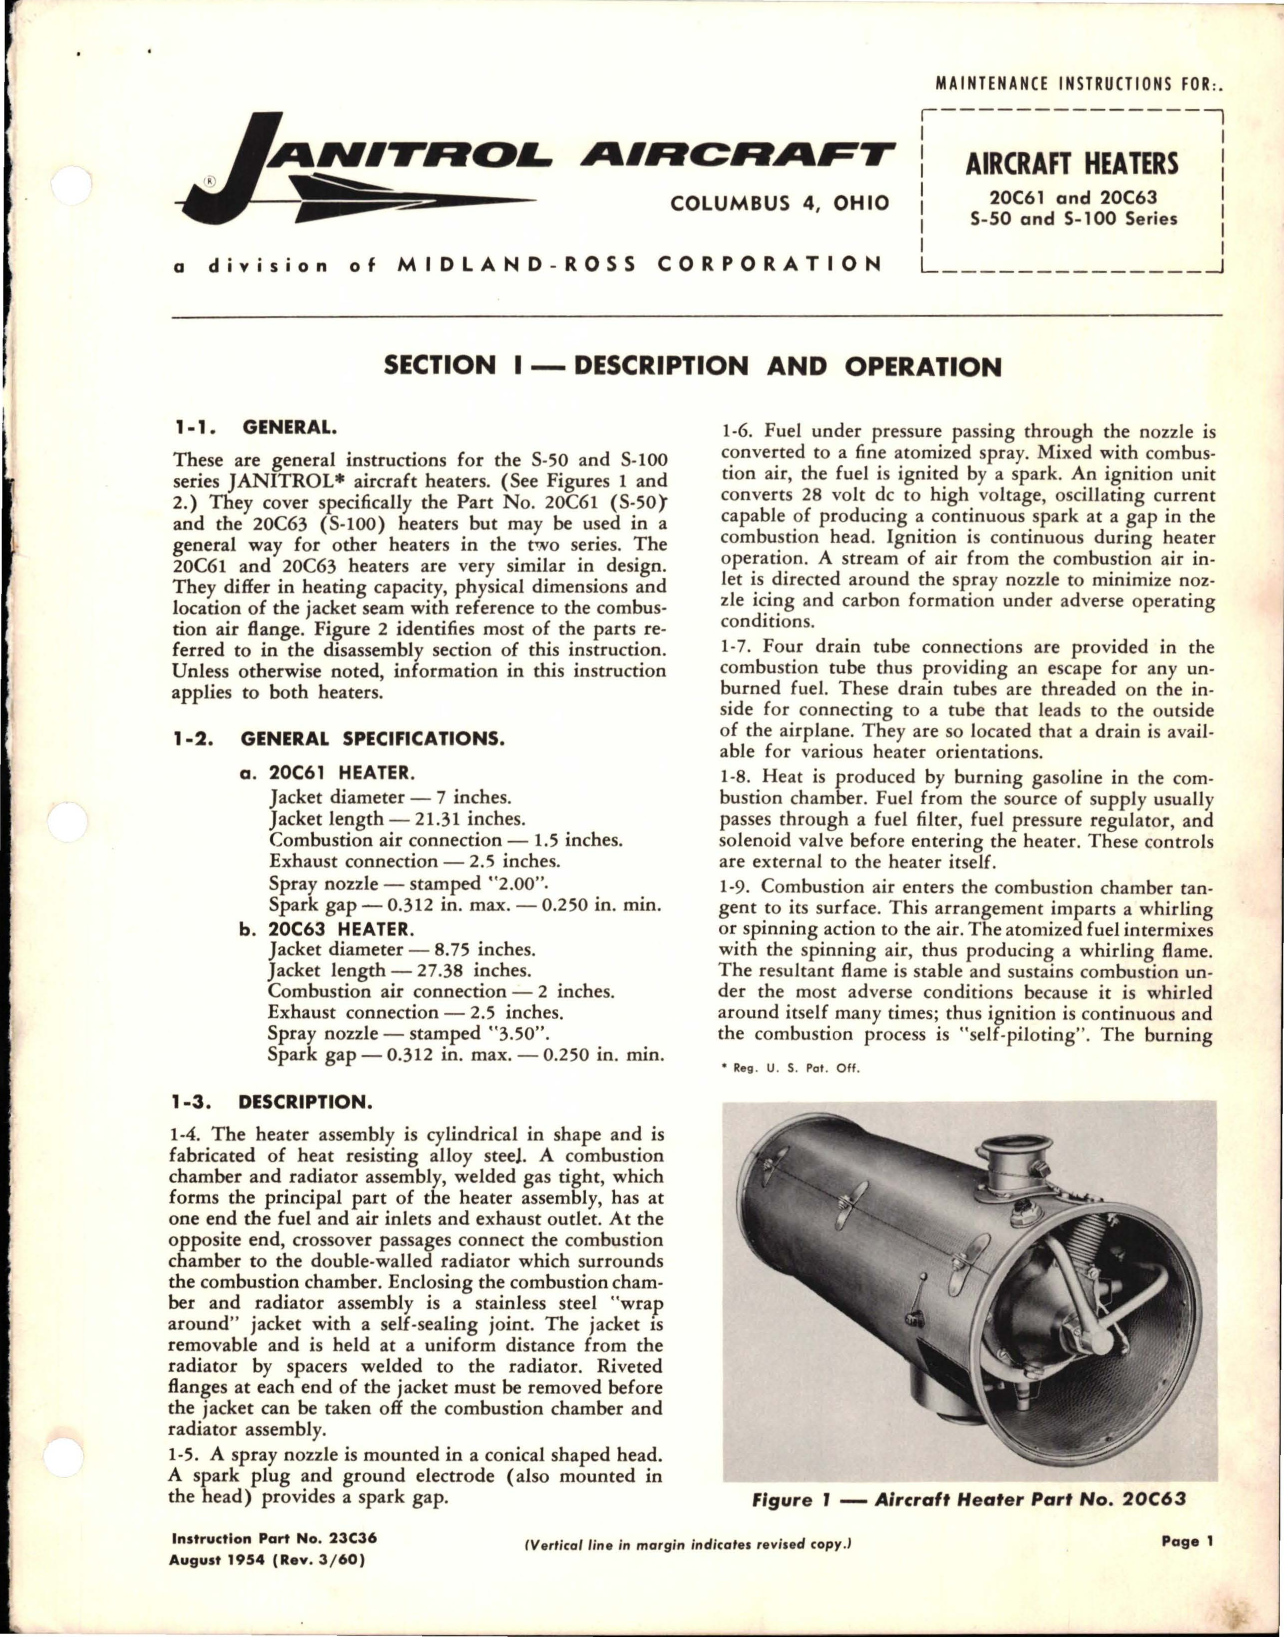 Sample page 1 from AirCorps Library document: Maintenance Instructions for Aircraft Heaters - 20C61, 20C63, S-50, and S-100 Series